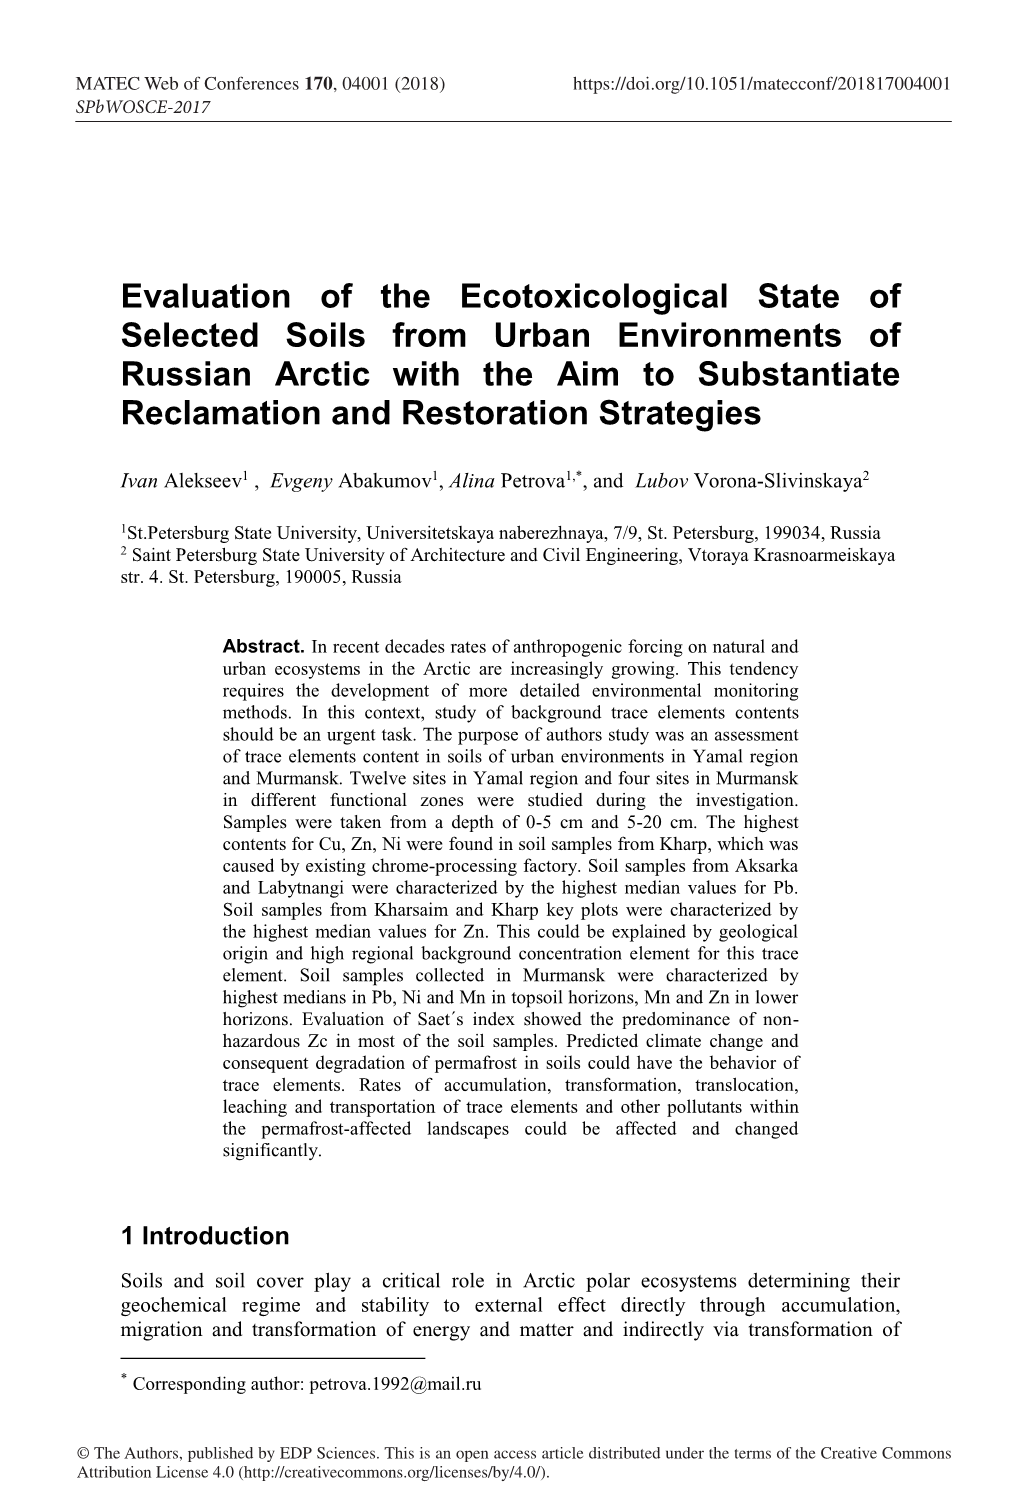 Evaluation of the Ecotoxicological State of Selected Soils from Urban